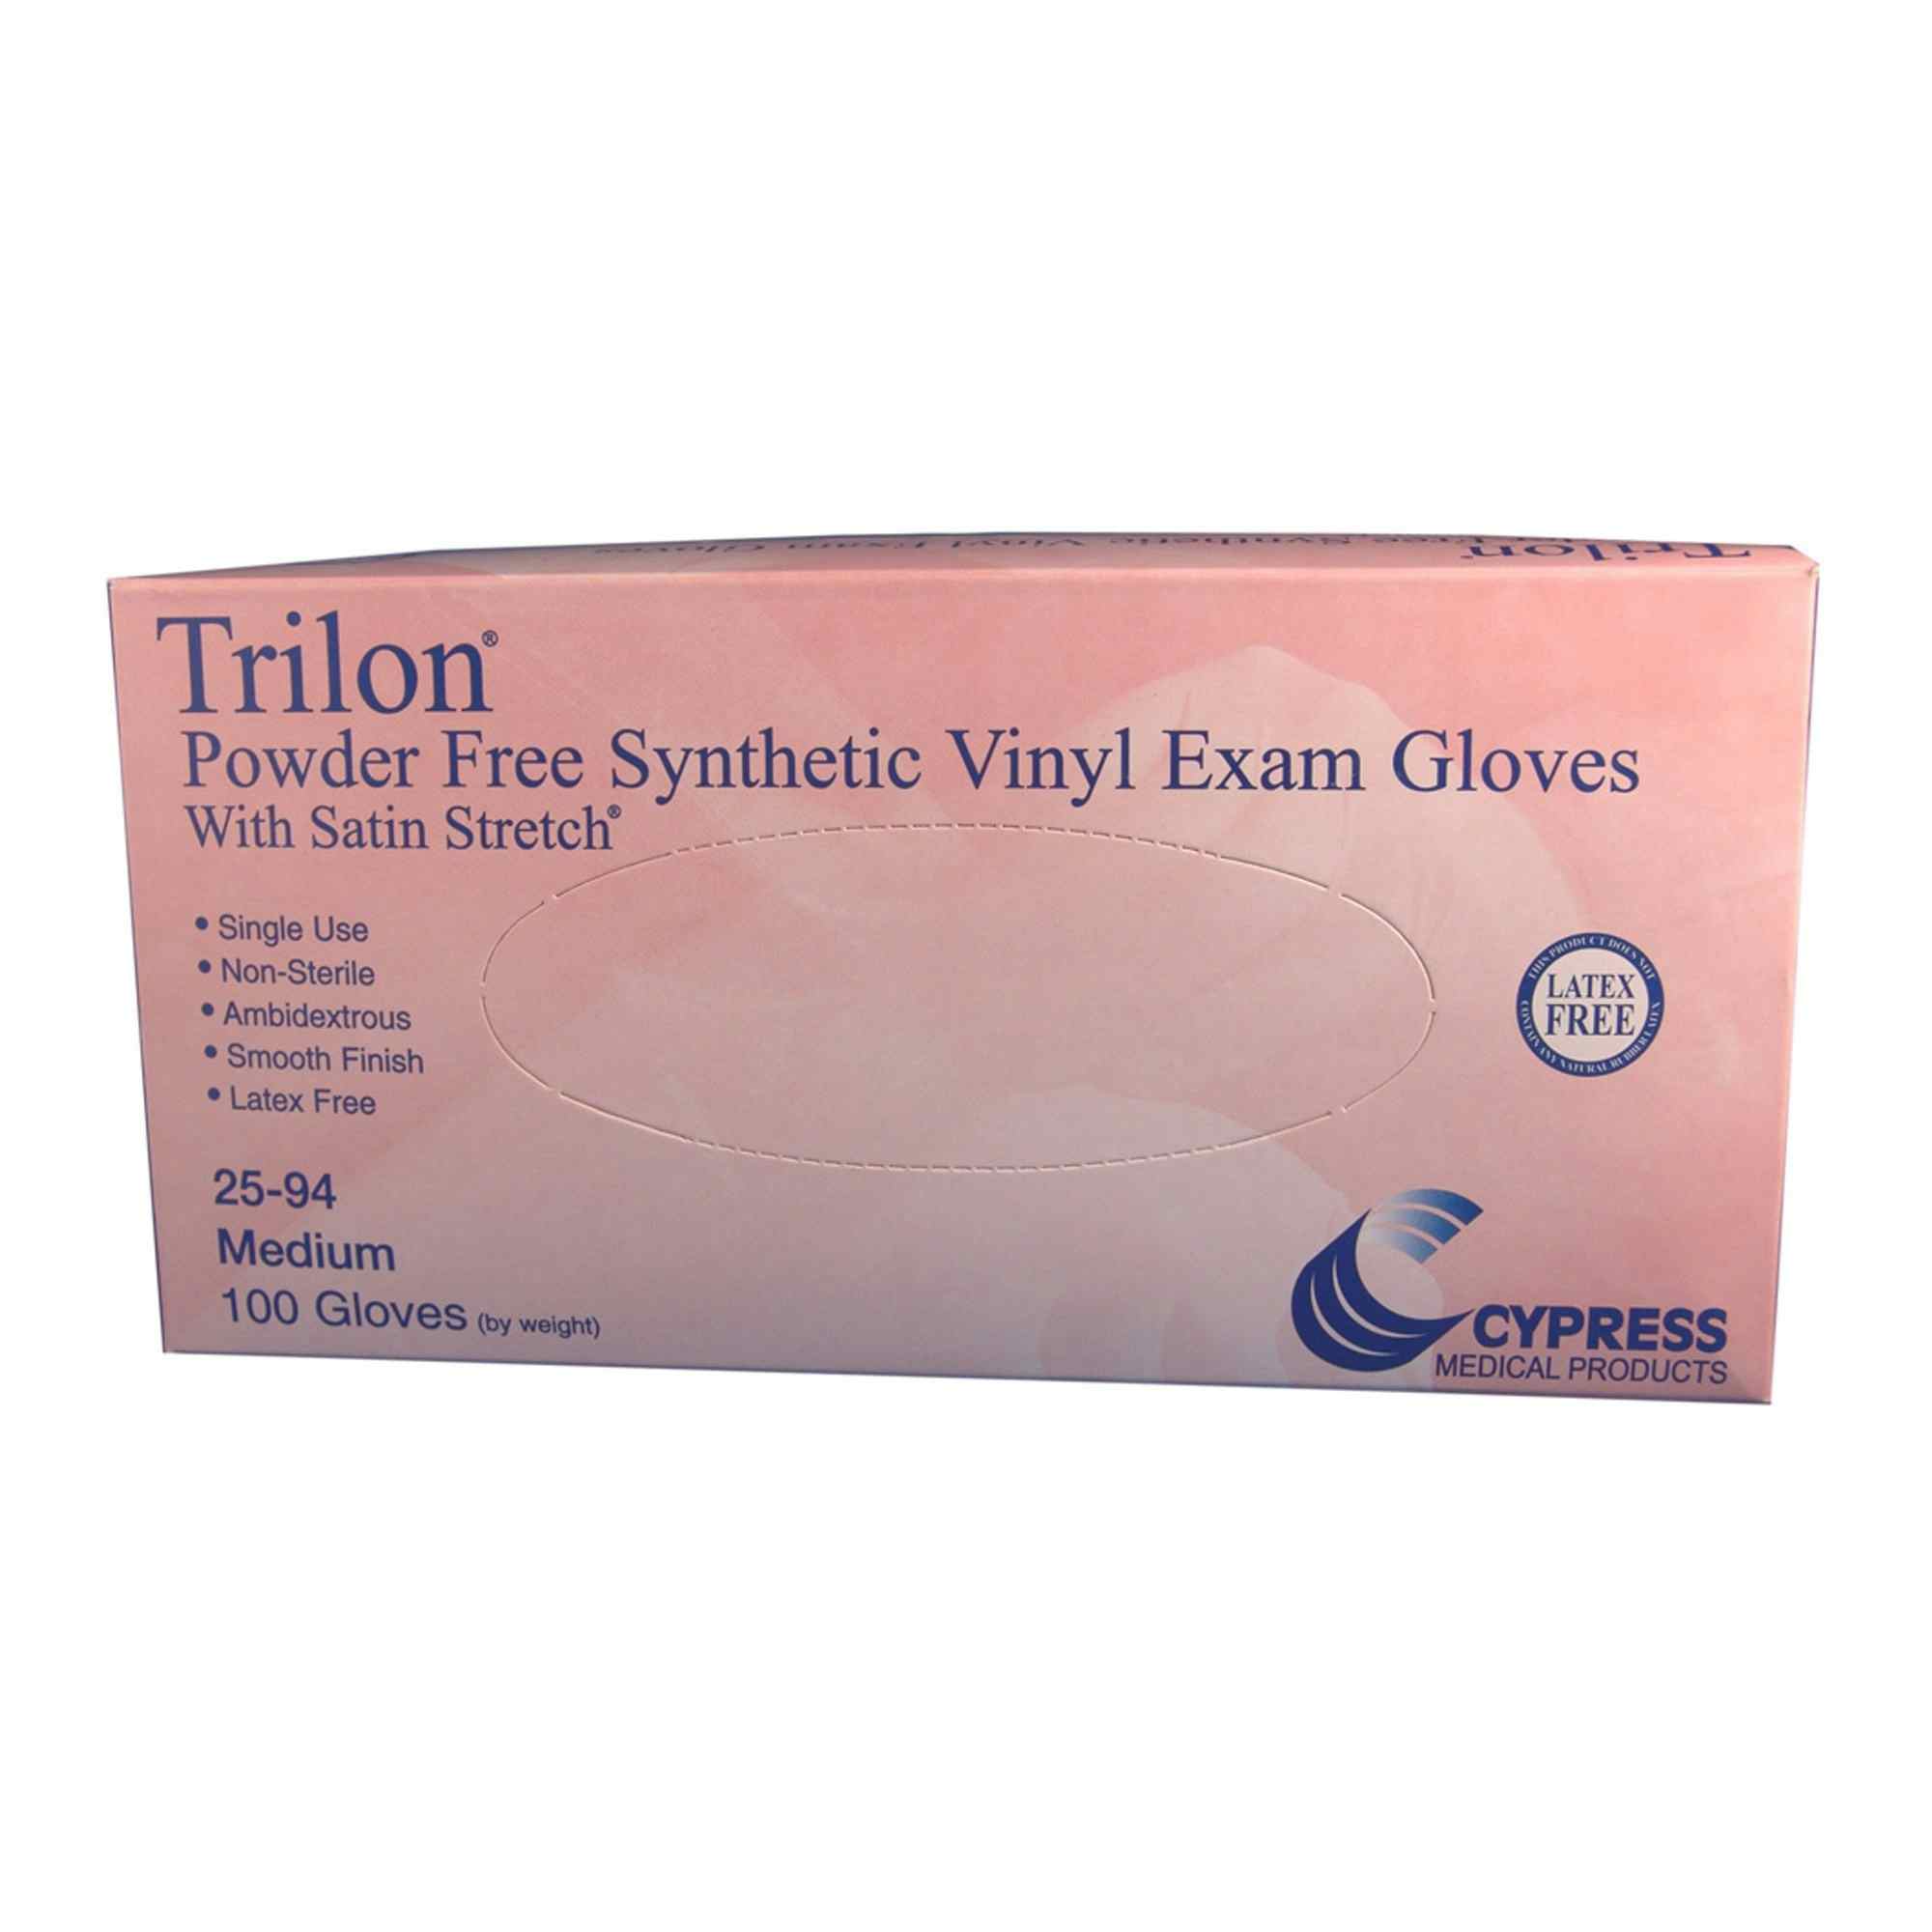 Trilon Powder Free Synthetic Vinyl Exam Glove, Clear, 25-96, Large - Box of 100